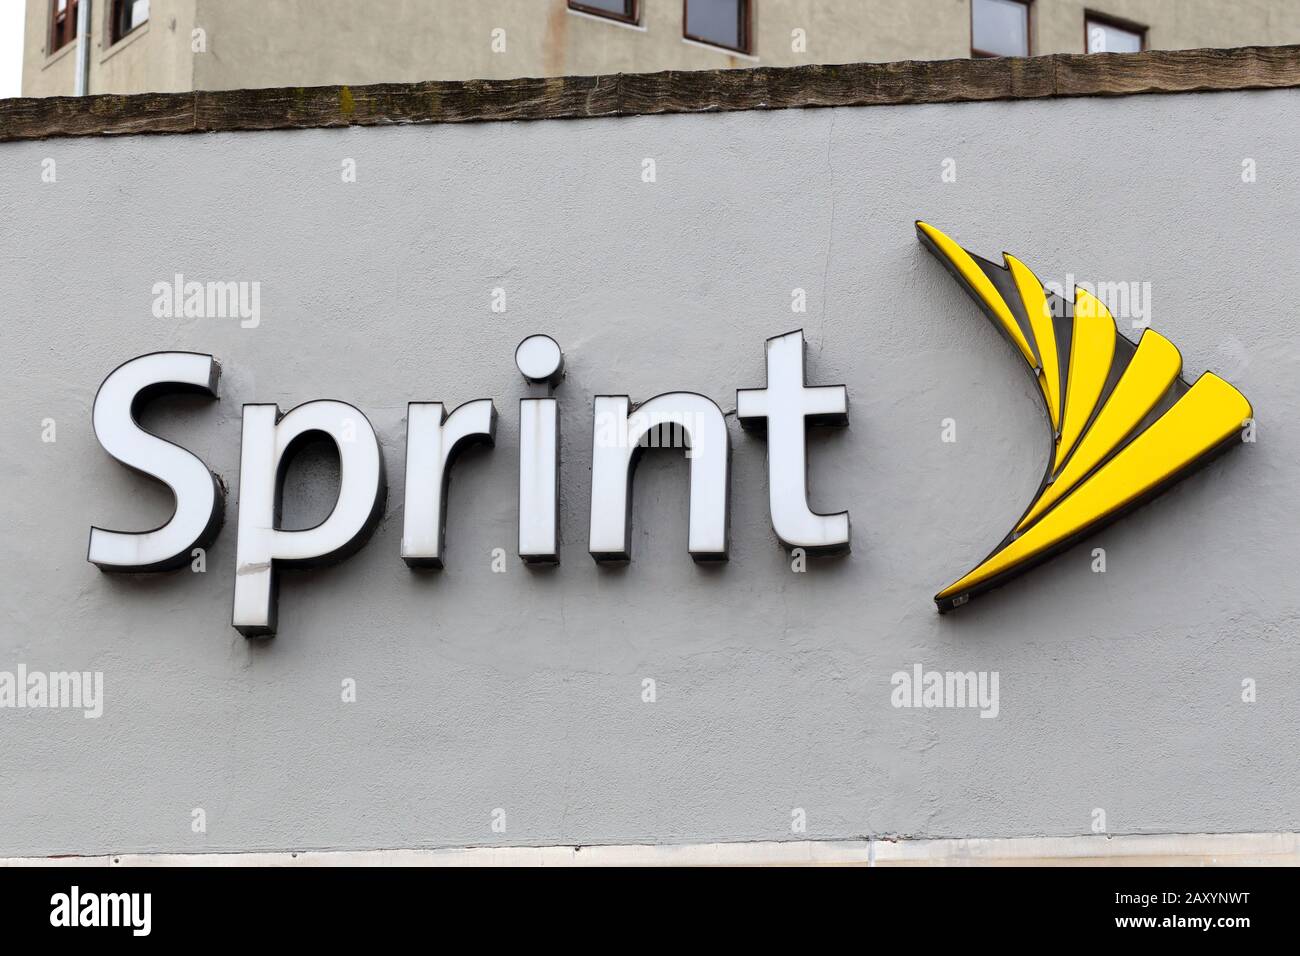 A Sprint logo on a wall at a store in New York, NY Stock Photo